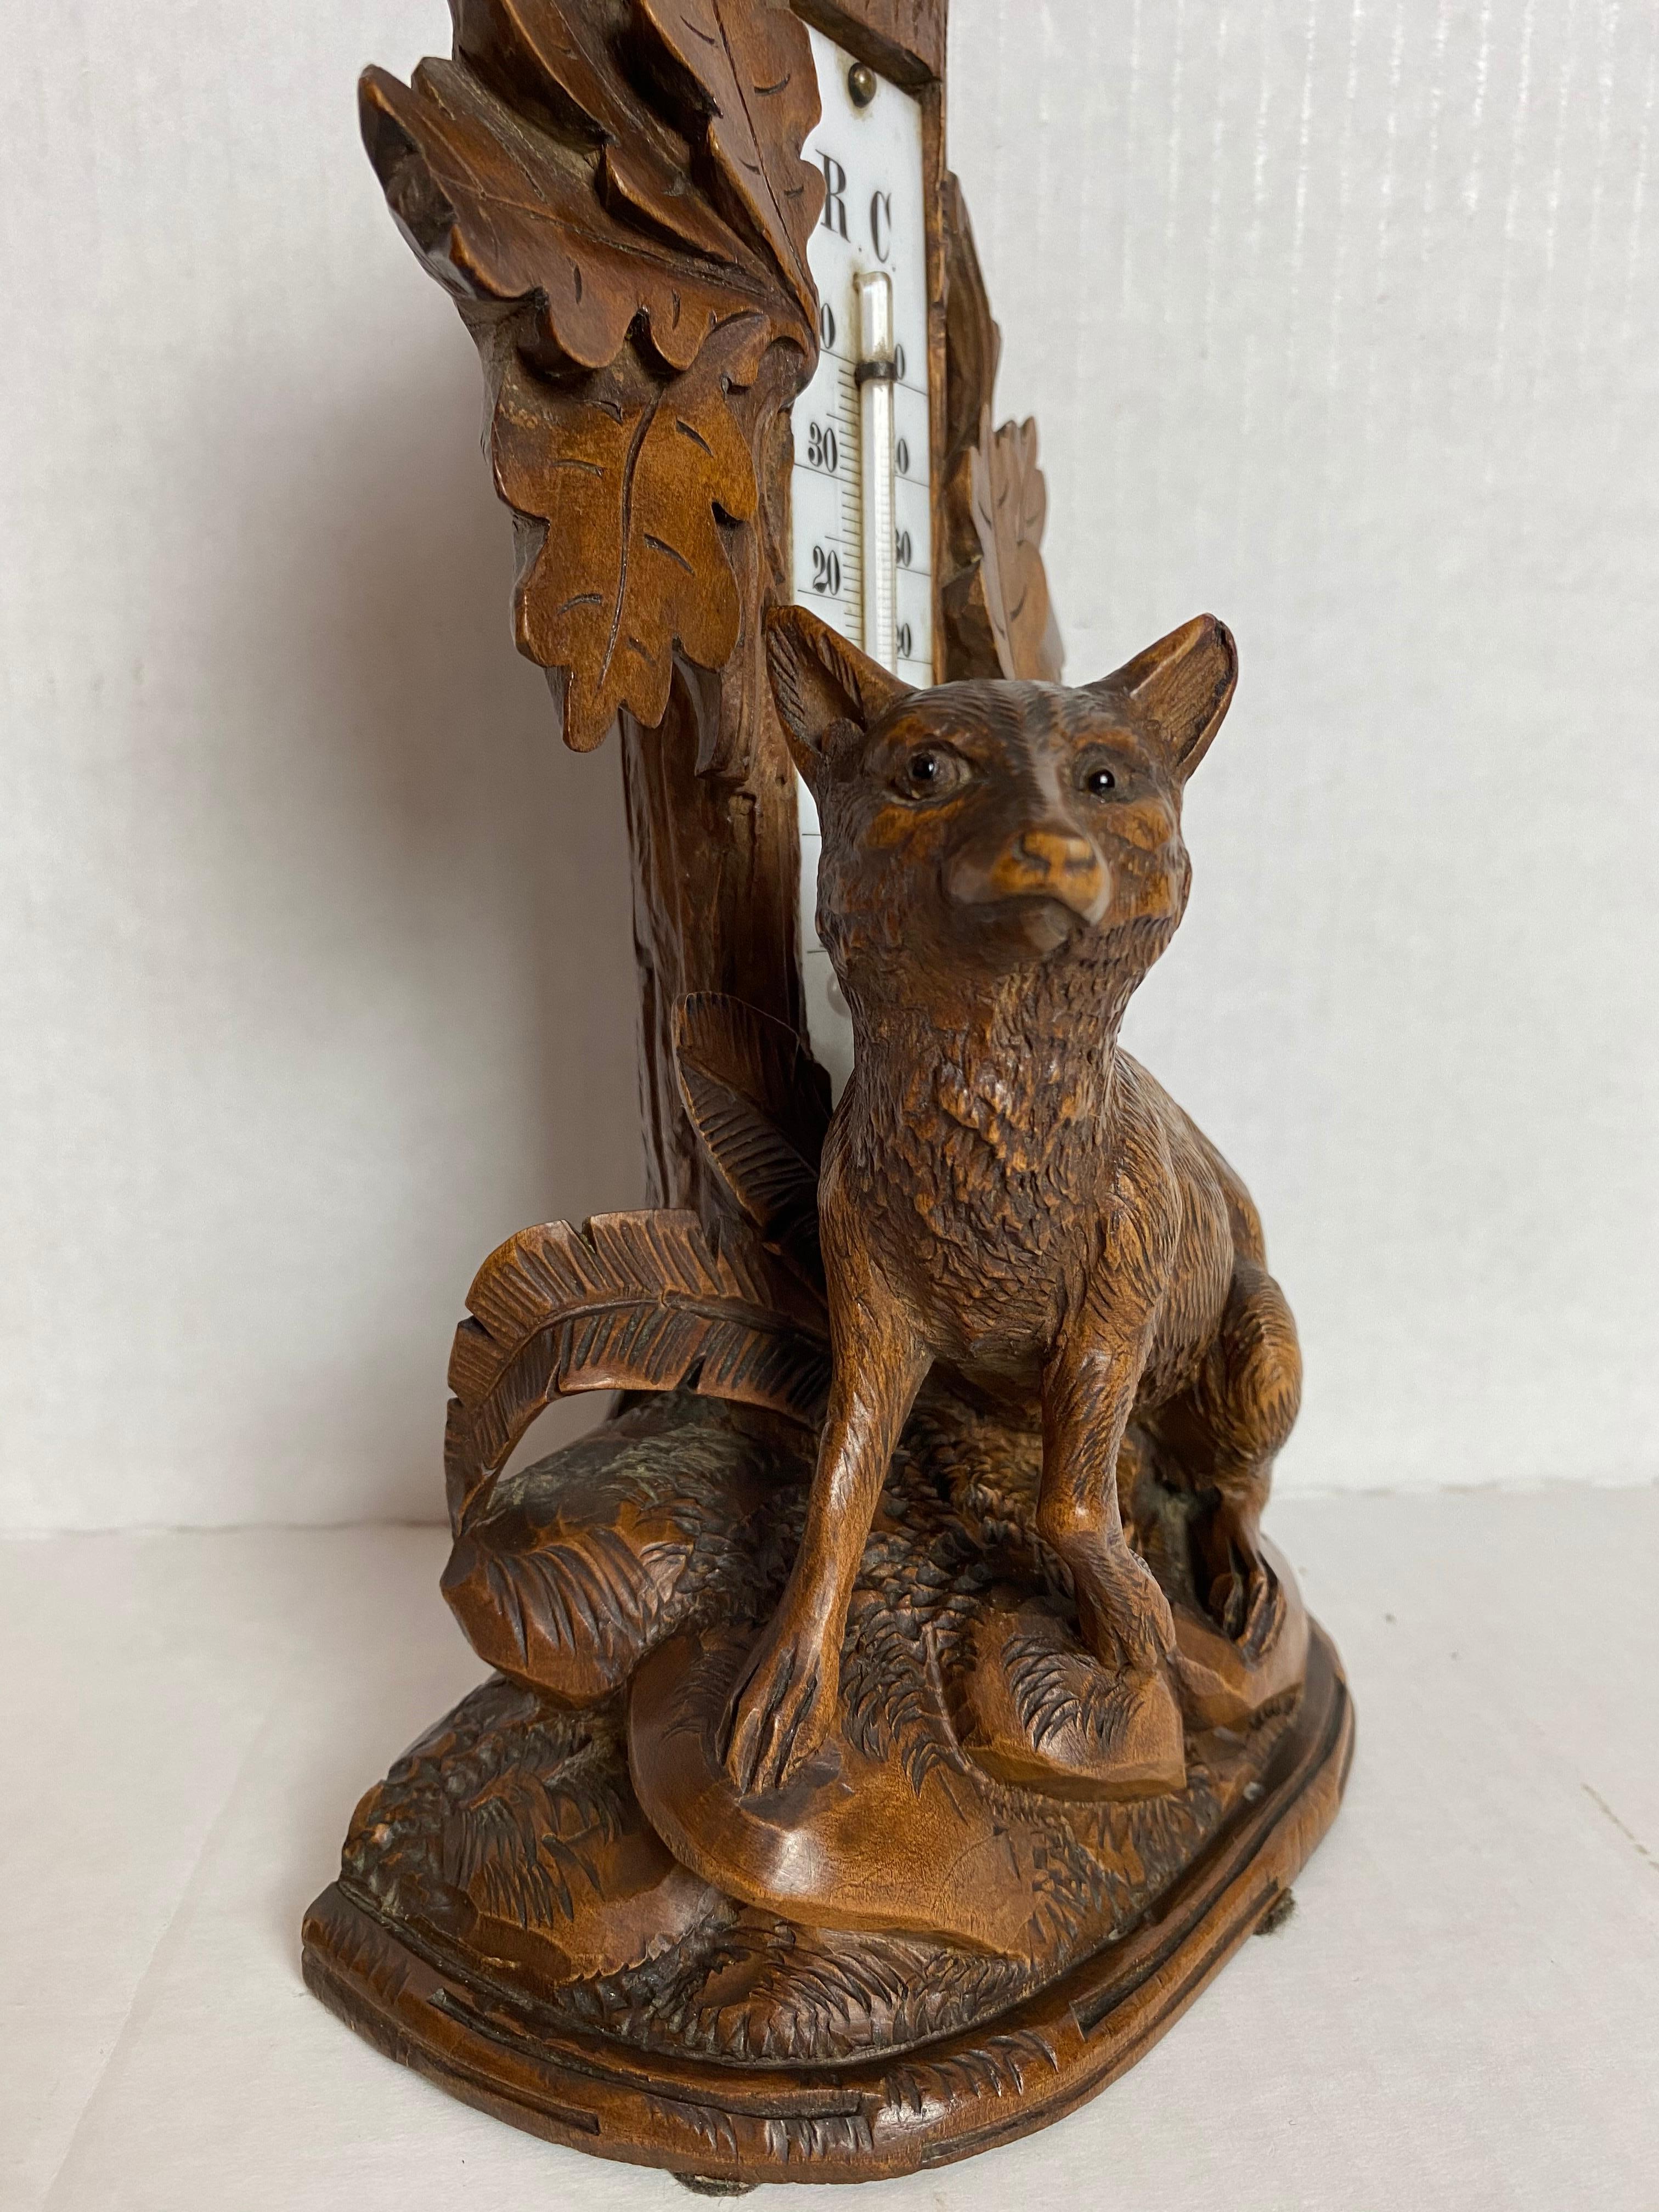 Swiss hand-carved Black Forest figure of a fox with thermometer, Brienz, Switzerland, circa 1880 in linden wood, with the original antique thermometer, with readings for C--Celsius and R--Rankine, inset to a naturalistically carved tree trunk,